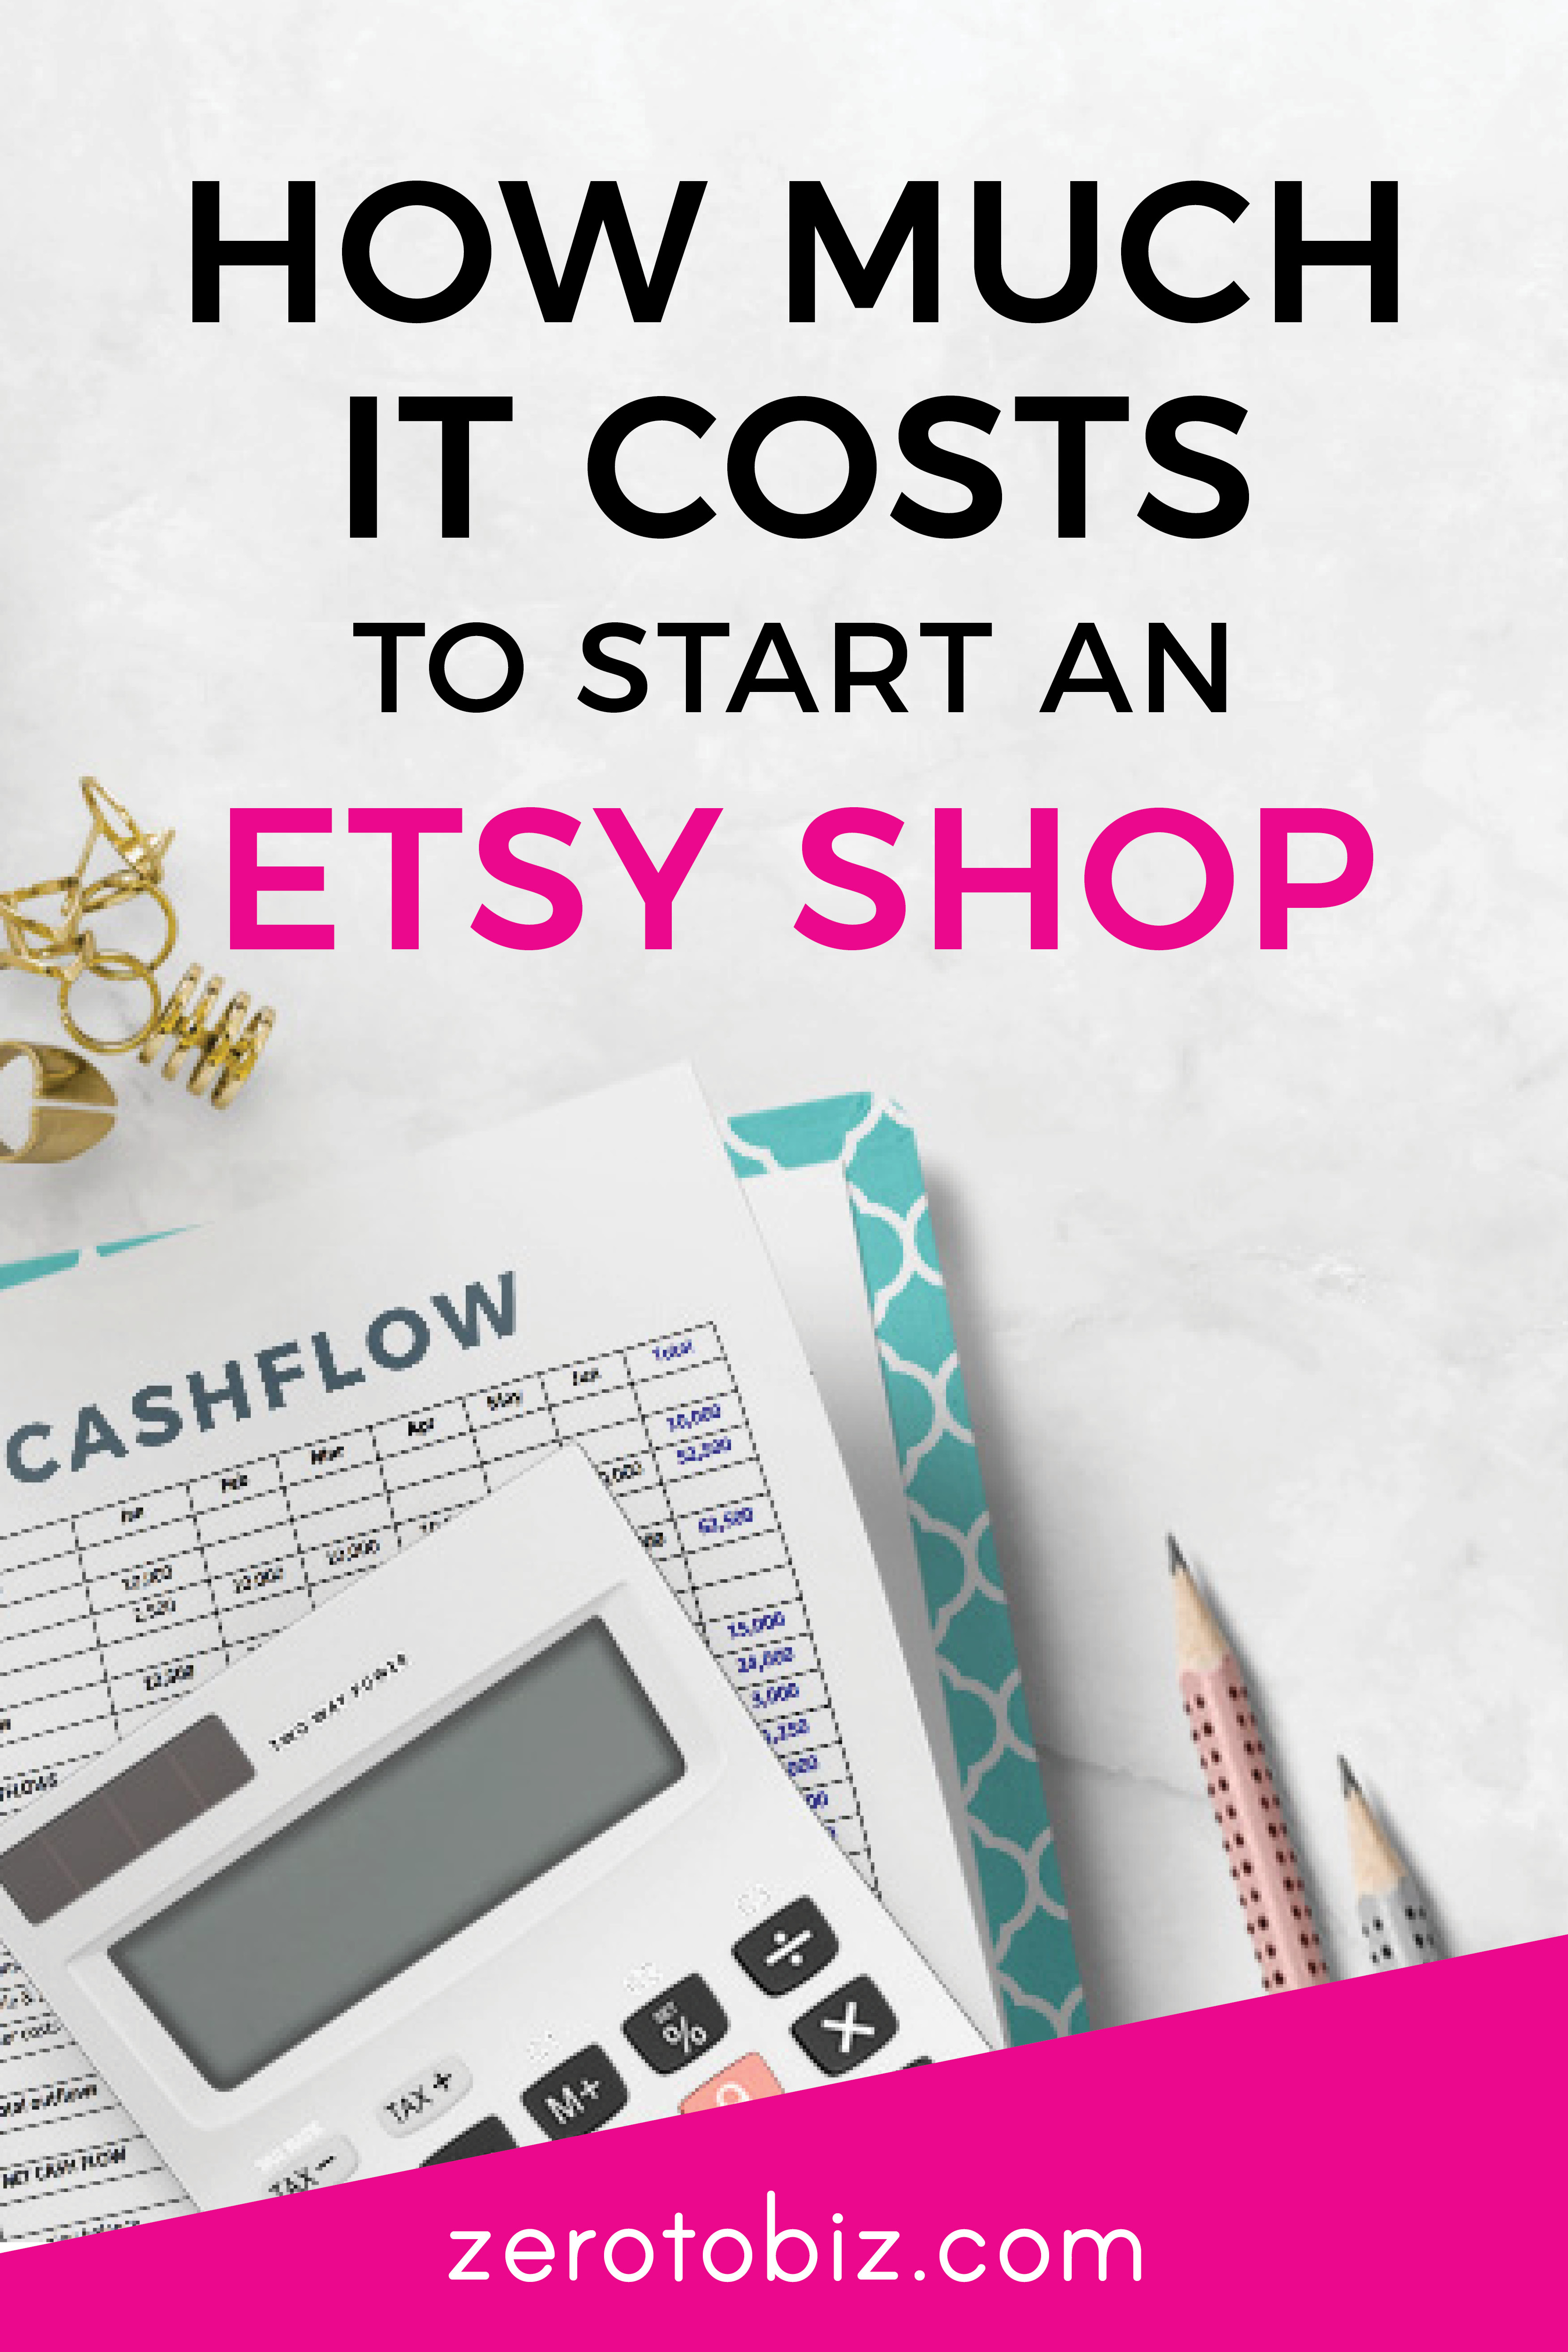 How Much Does It Cost to Start an Etsy Shop? - zero to biz